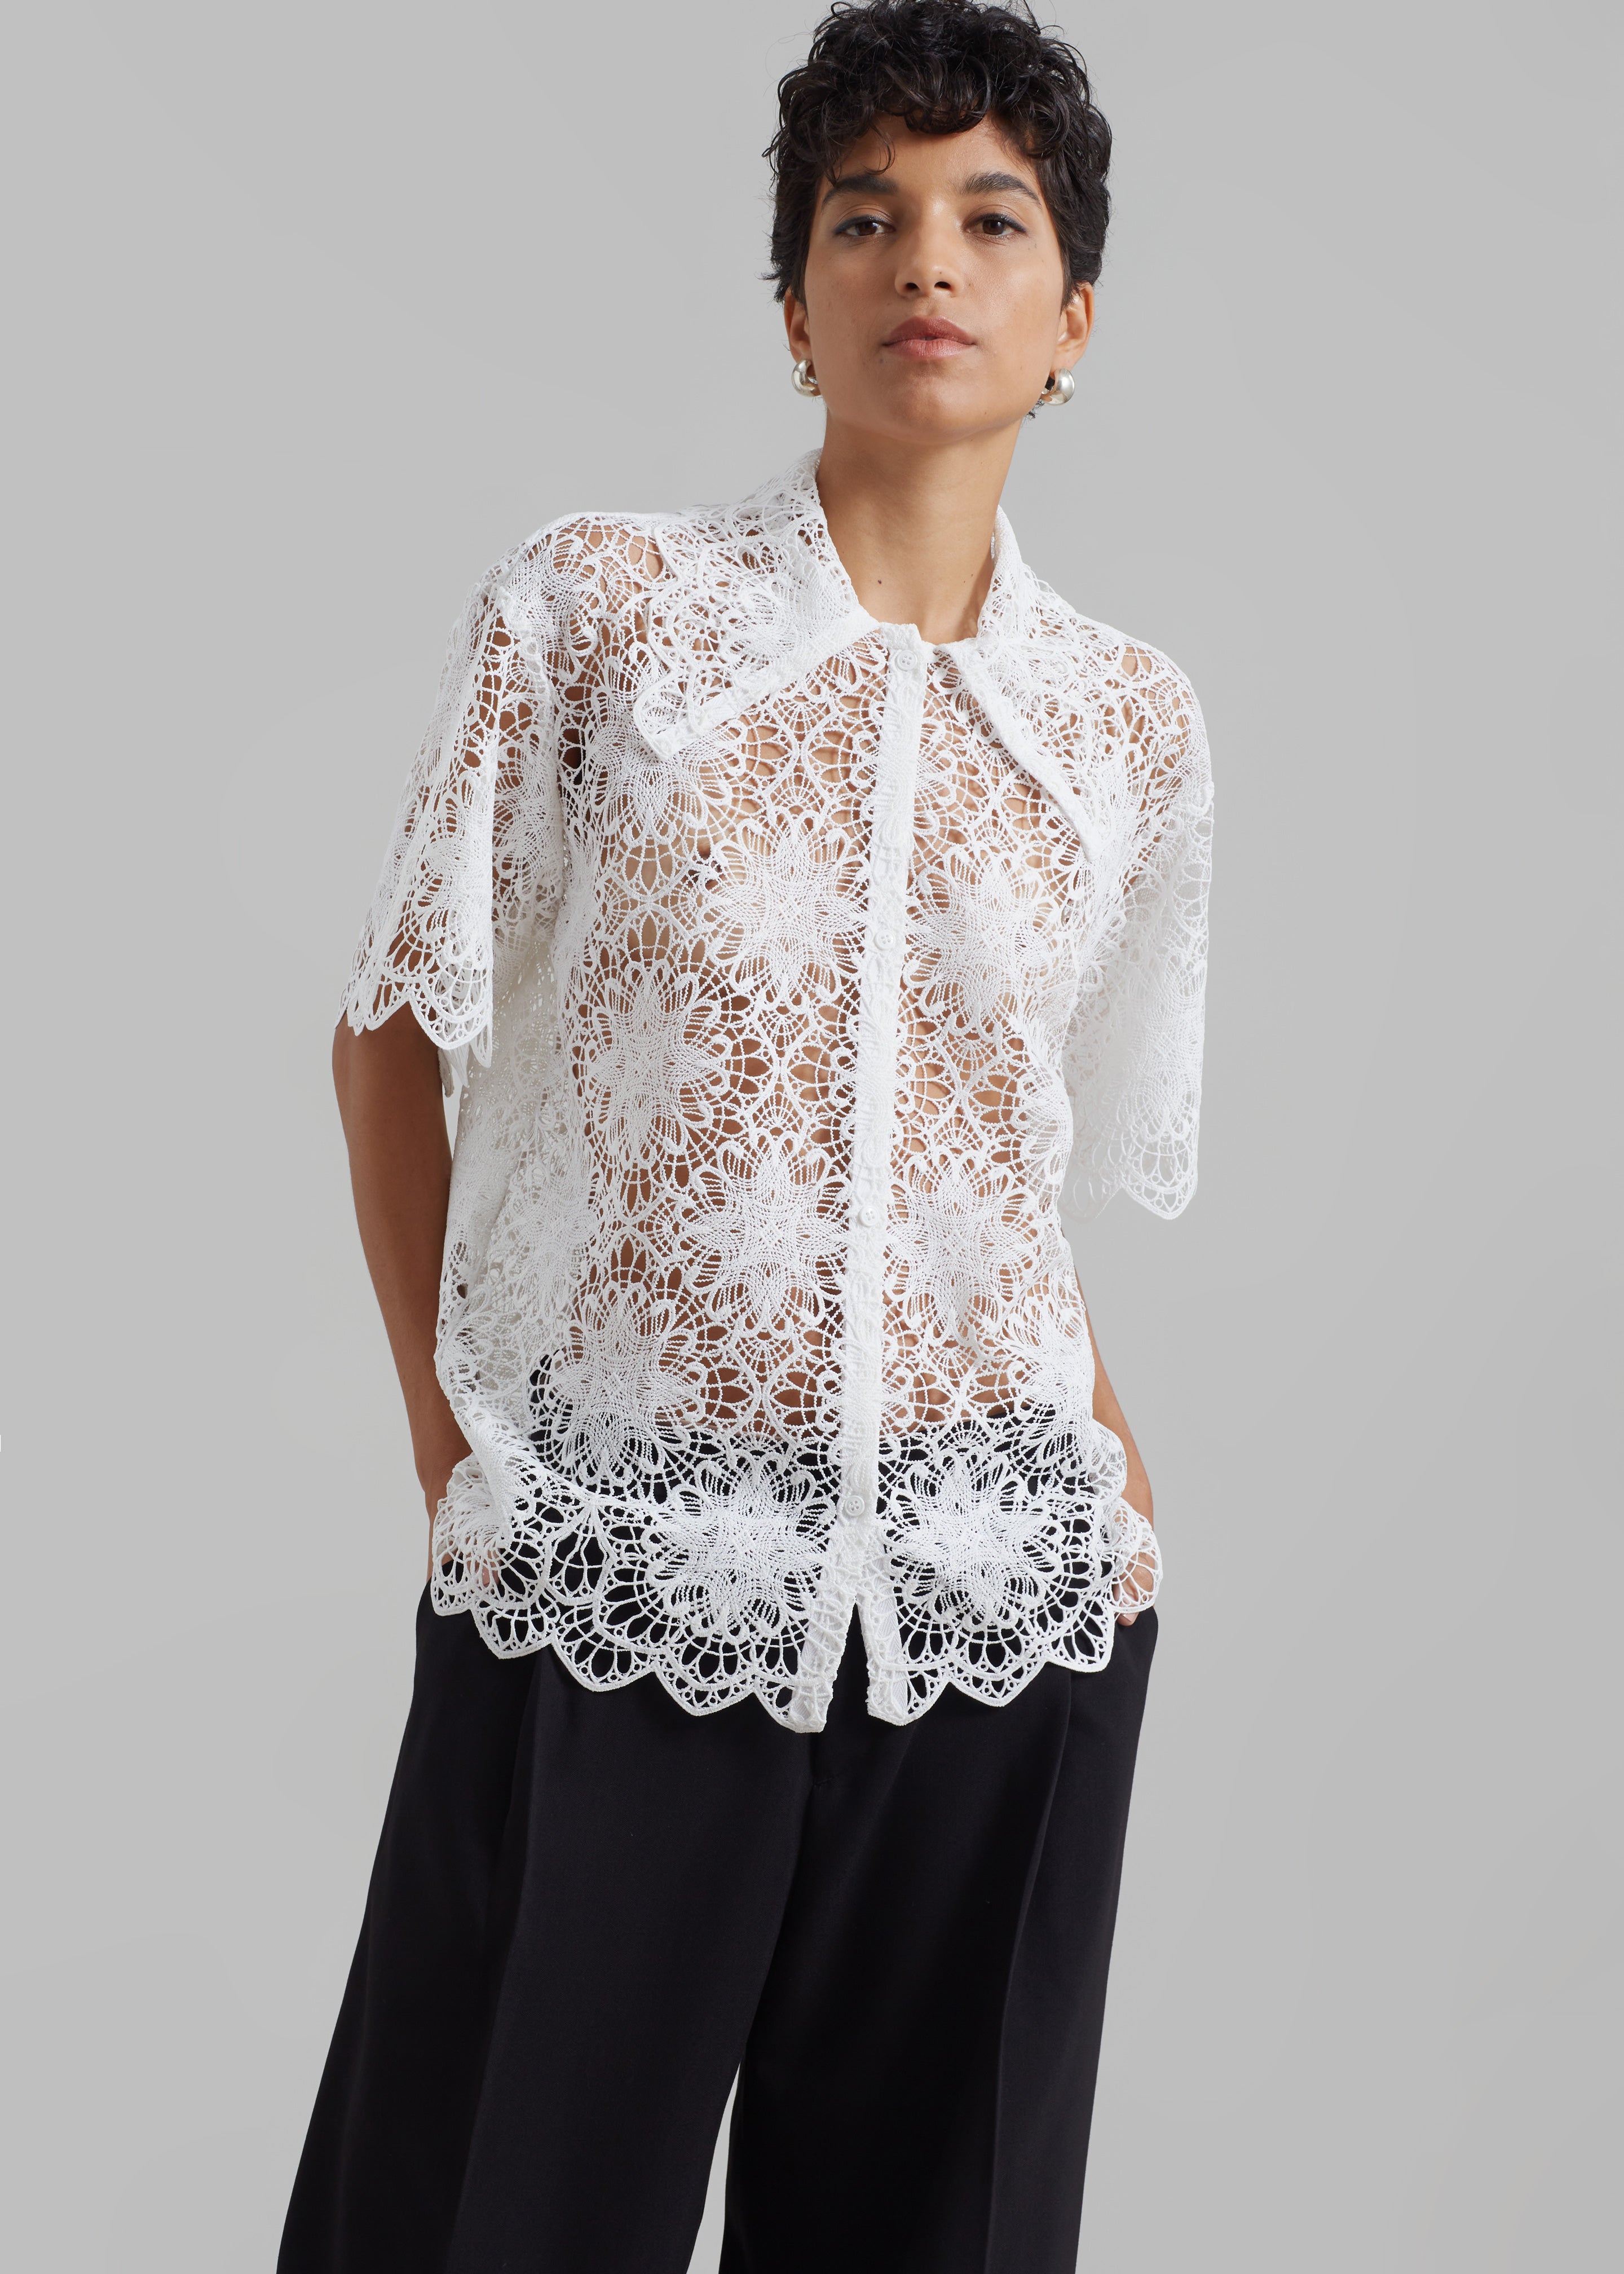 Beaufille Matisse Blouse - Ivory - 4